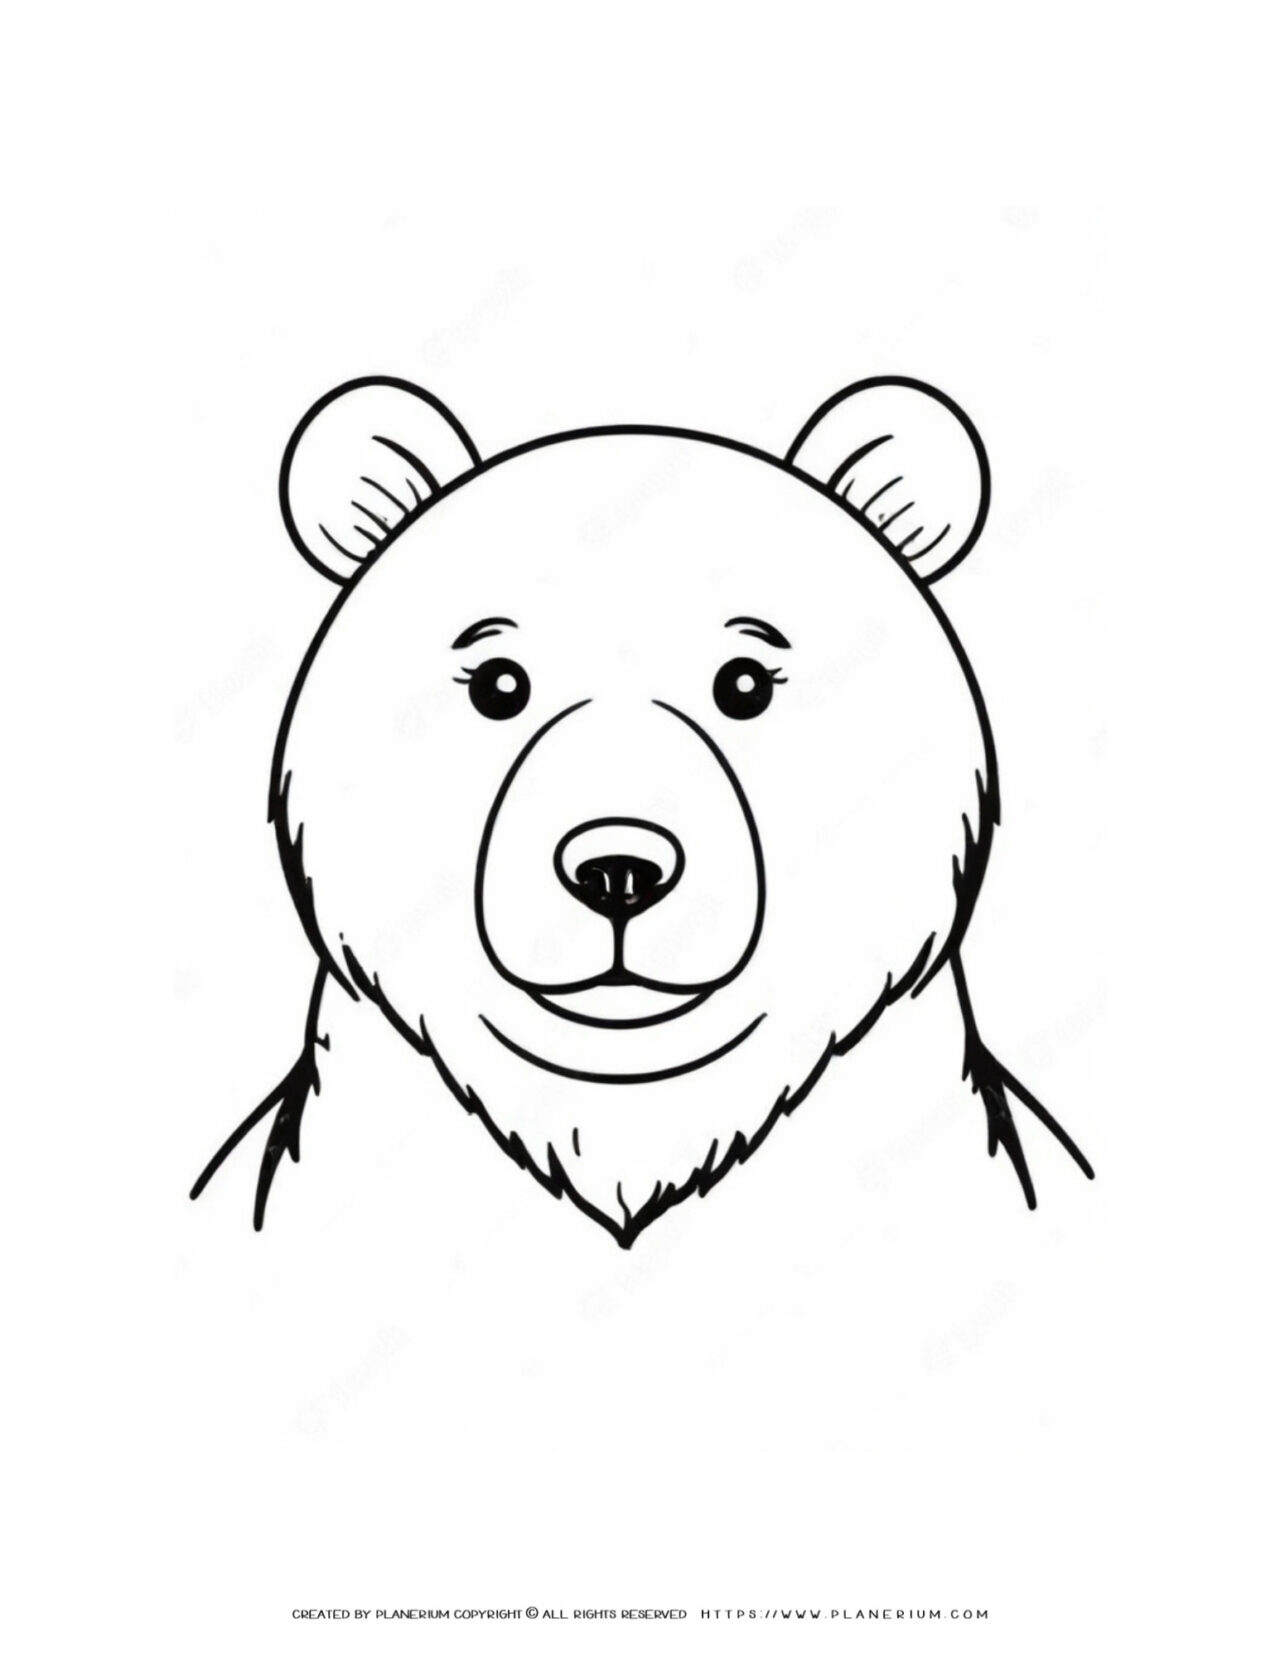 Bear-Face-Outline-Coloring-Page